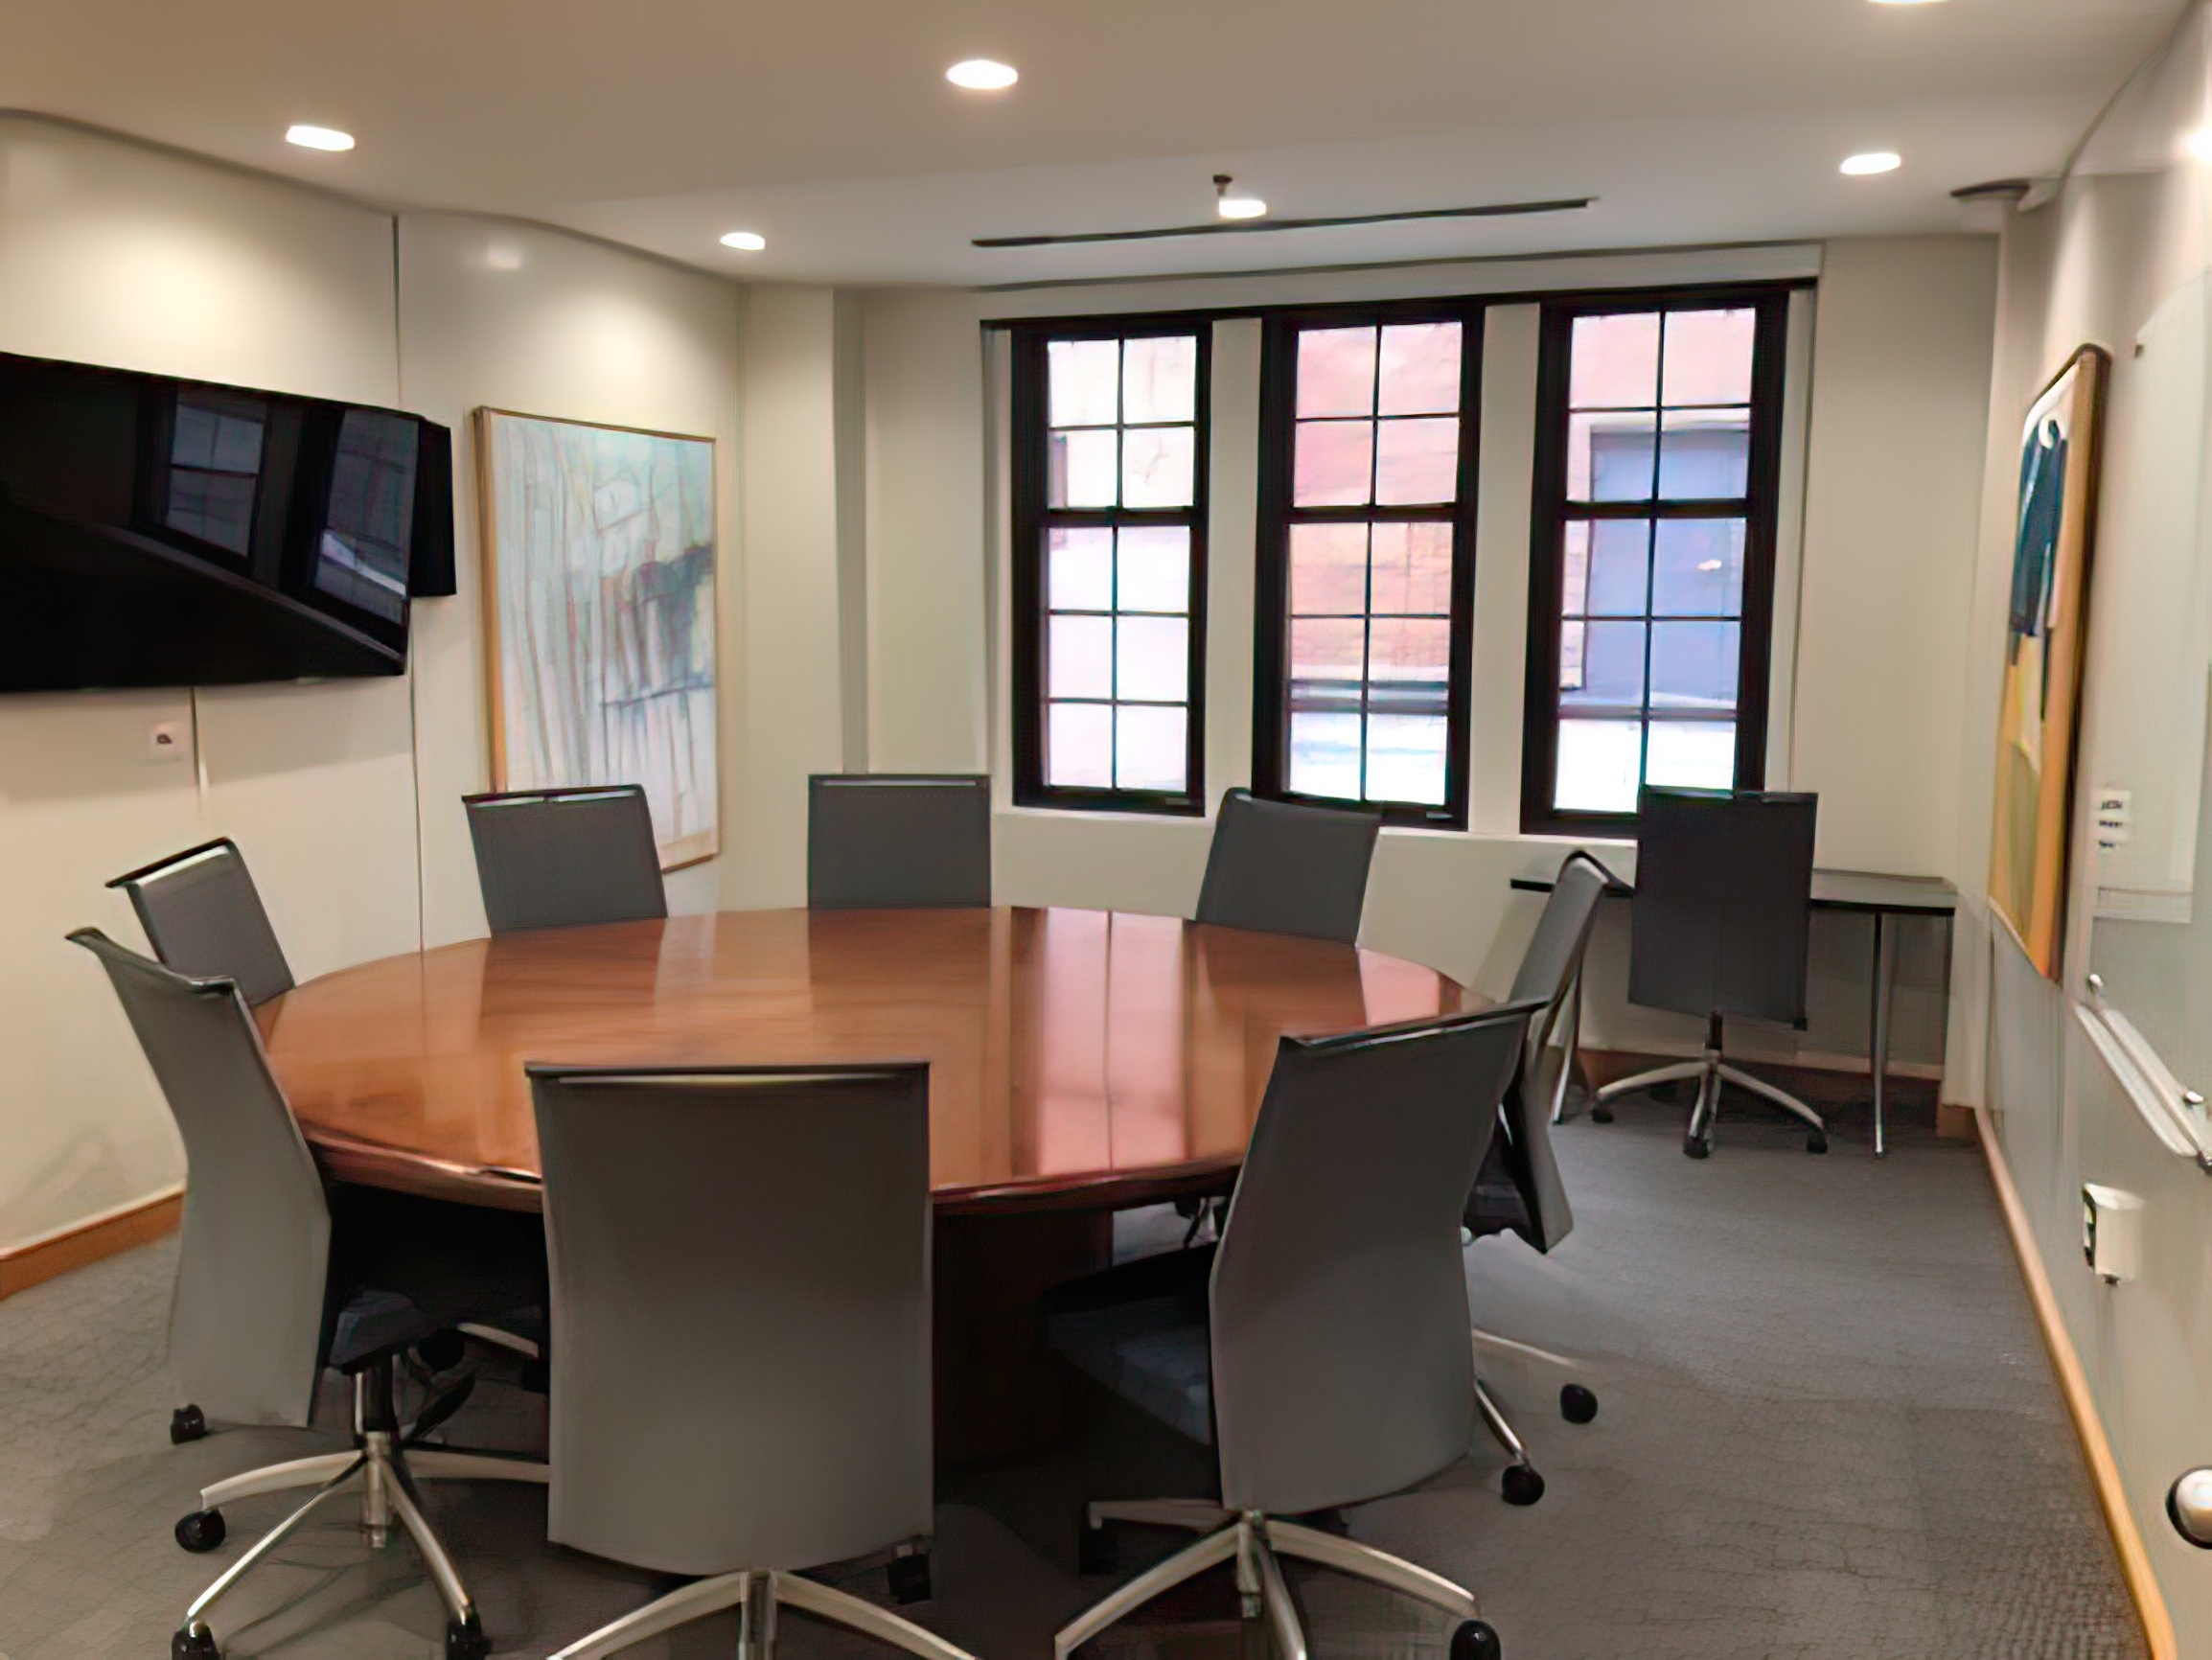 Round conference table lined with chairs.